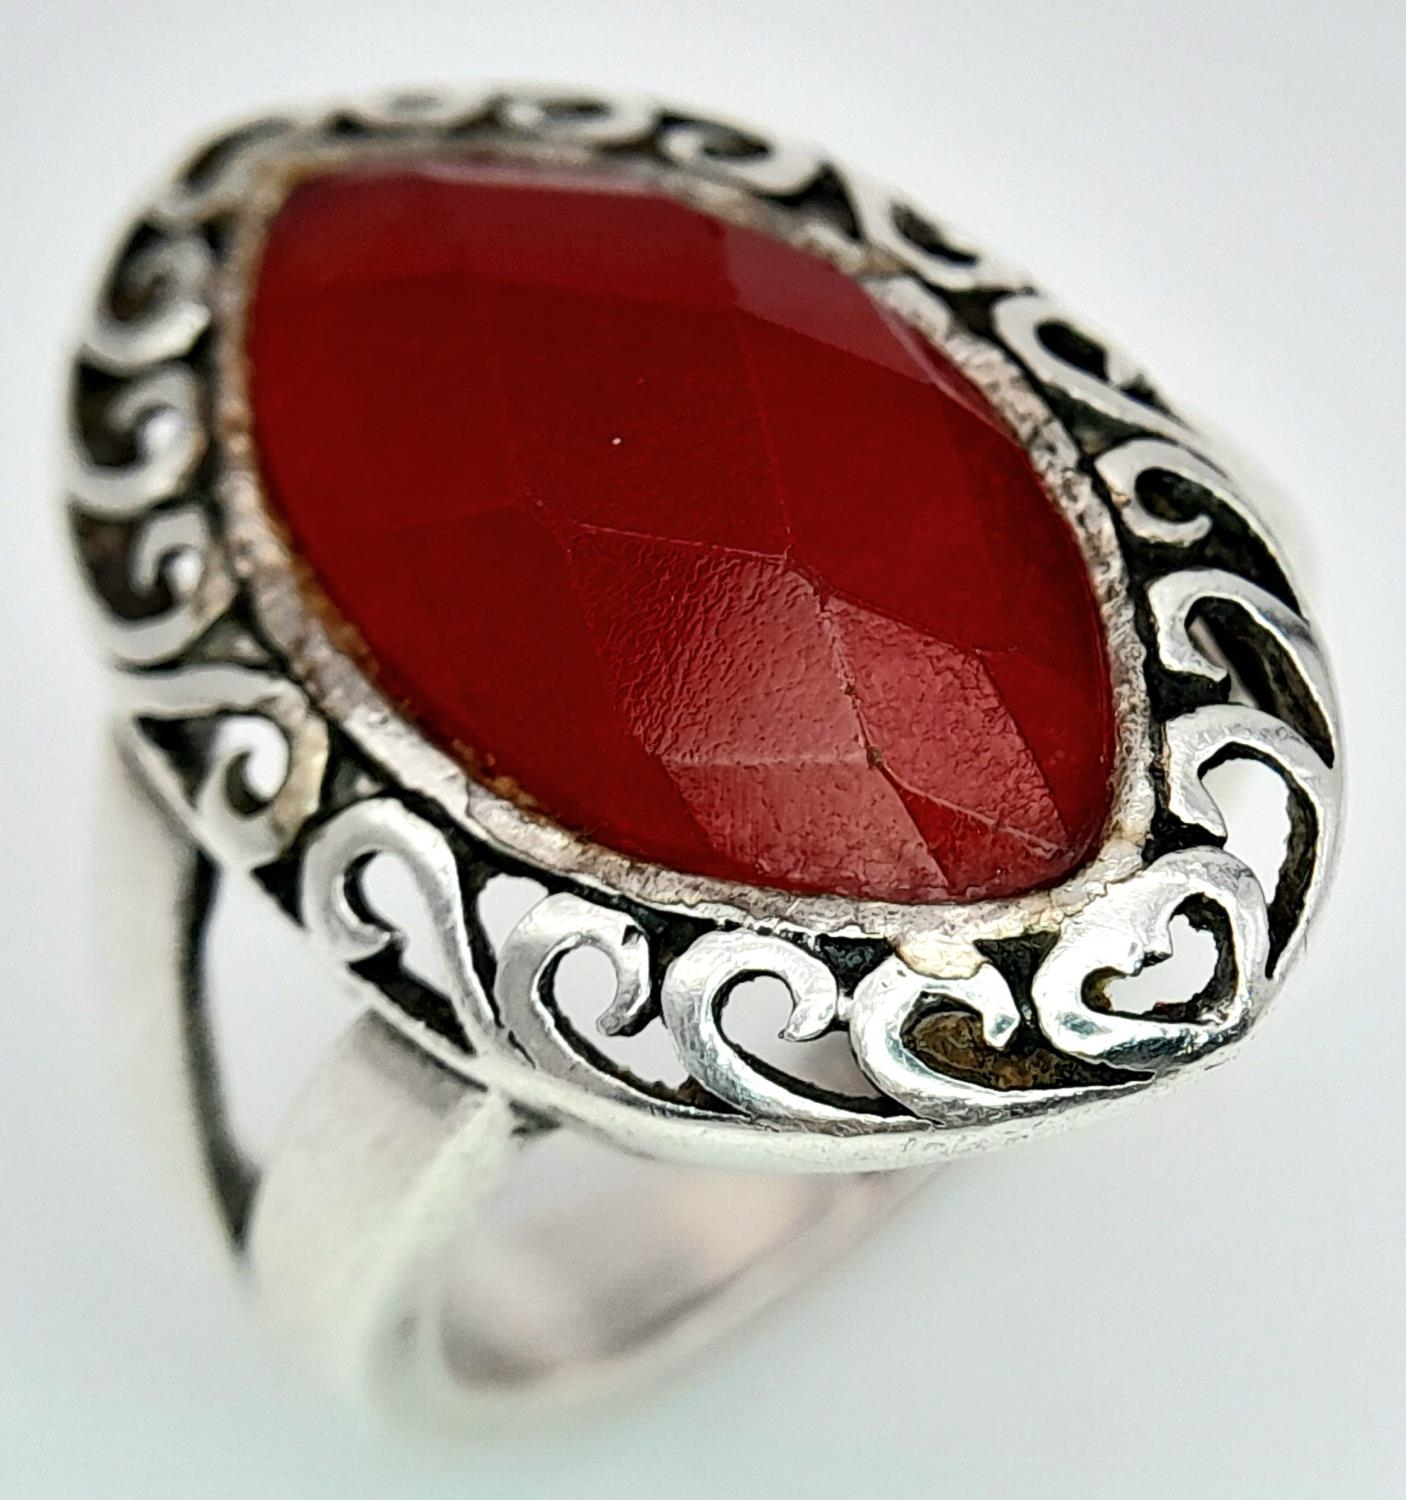 A Red Stone on 925 Silver Ring. Size P, 5.85g total weight. - Image 6 of 6